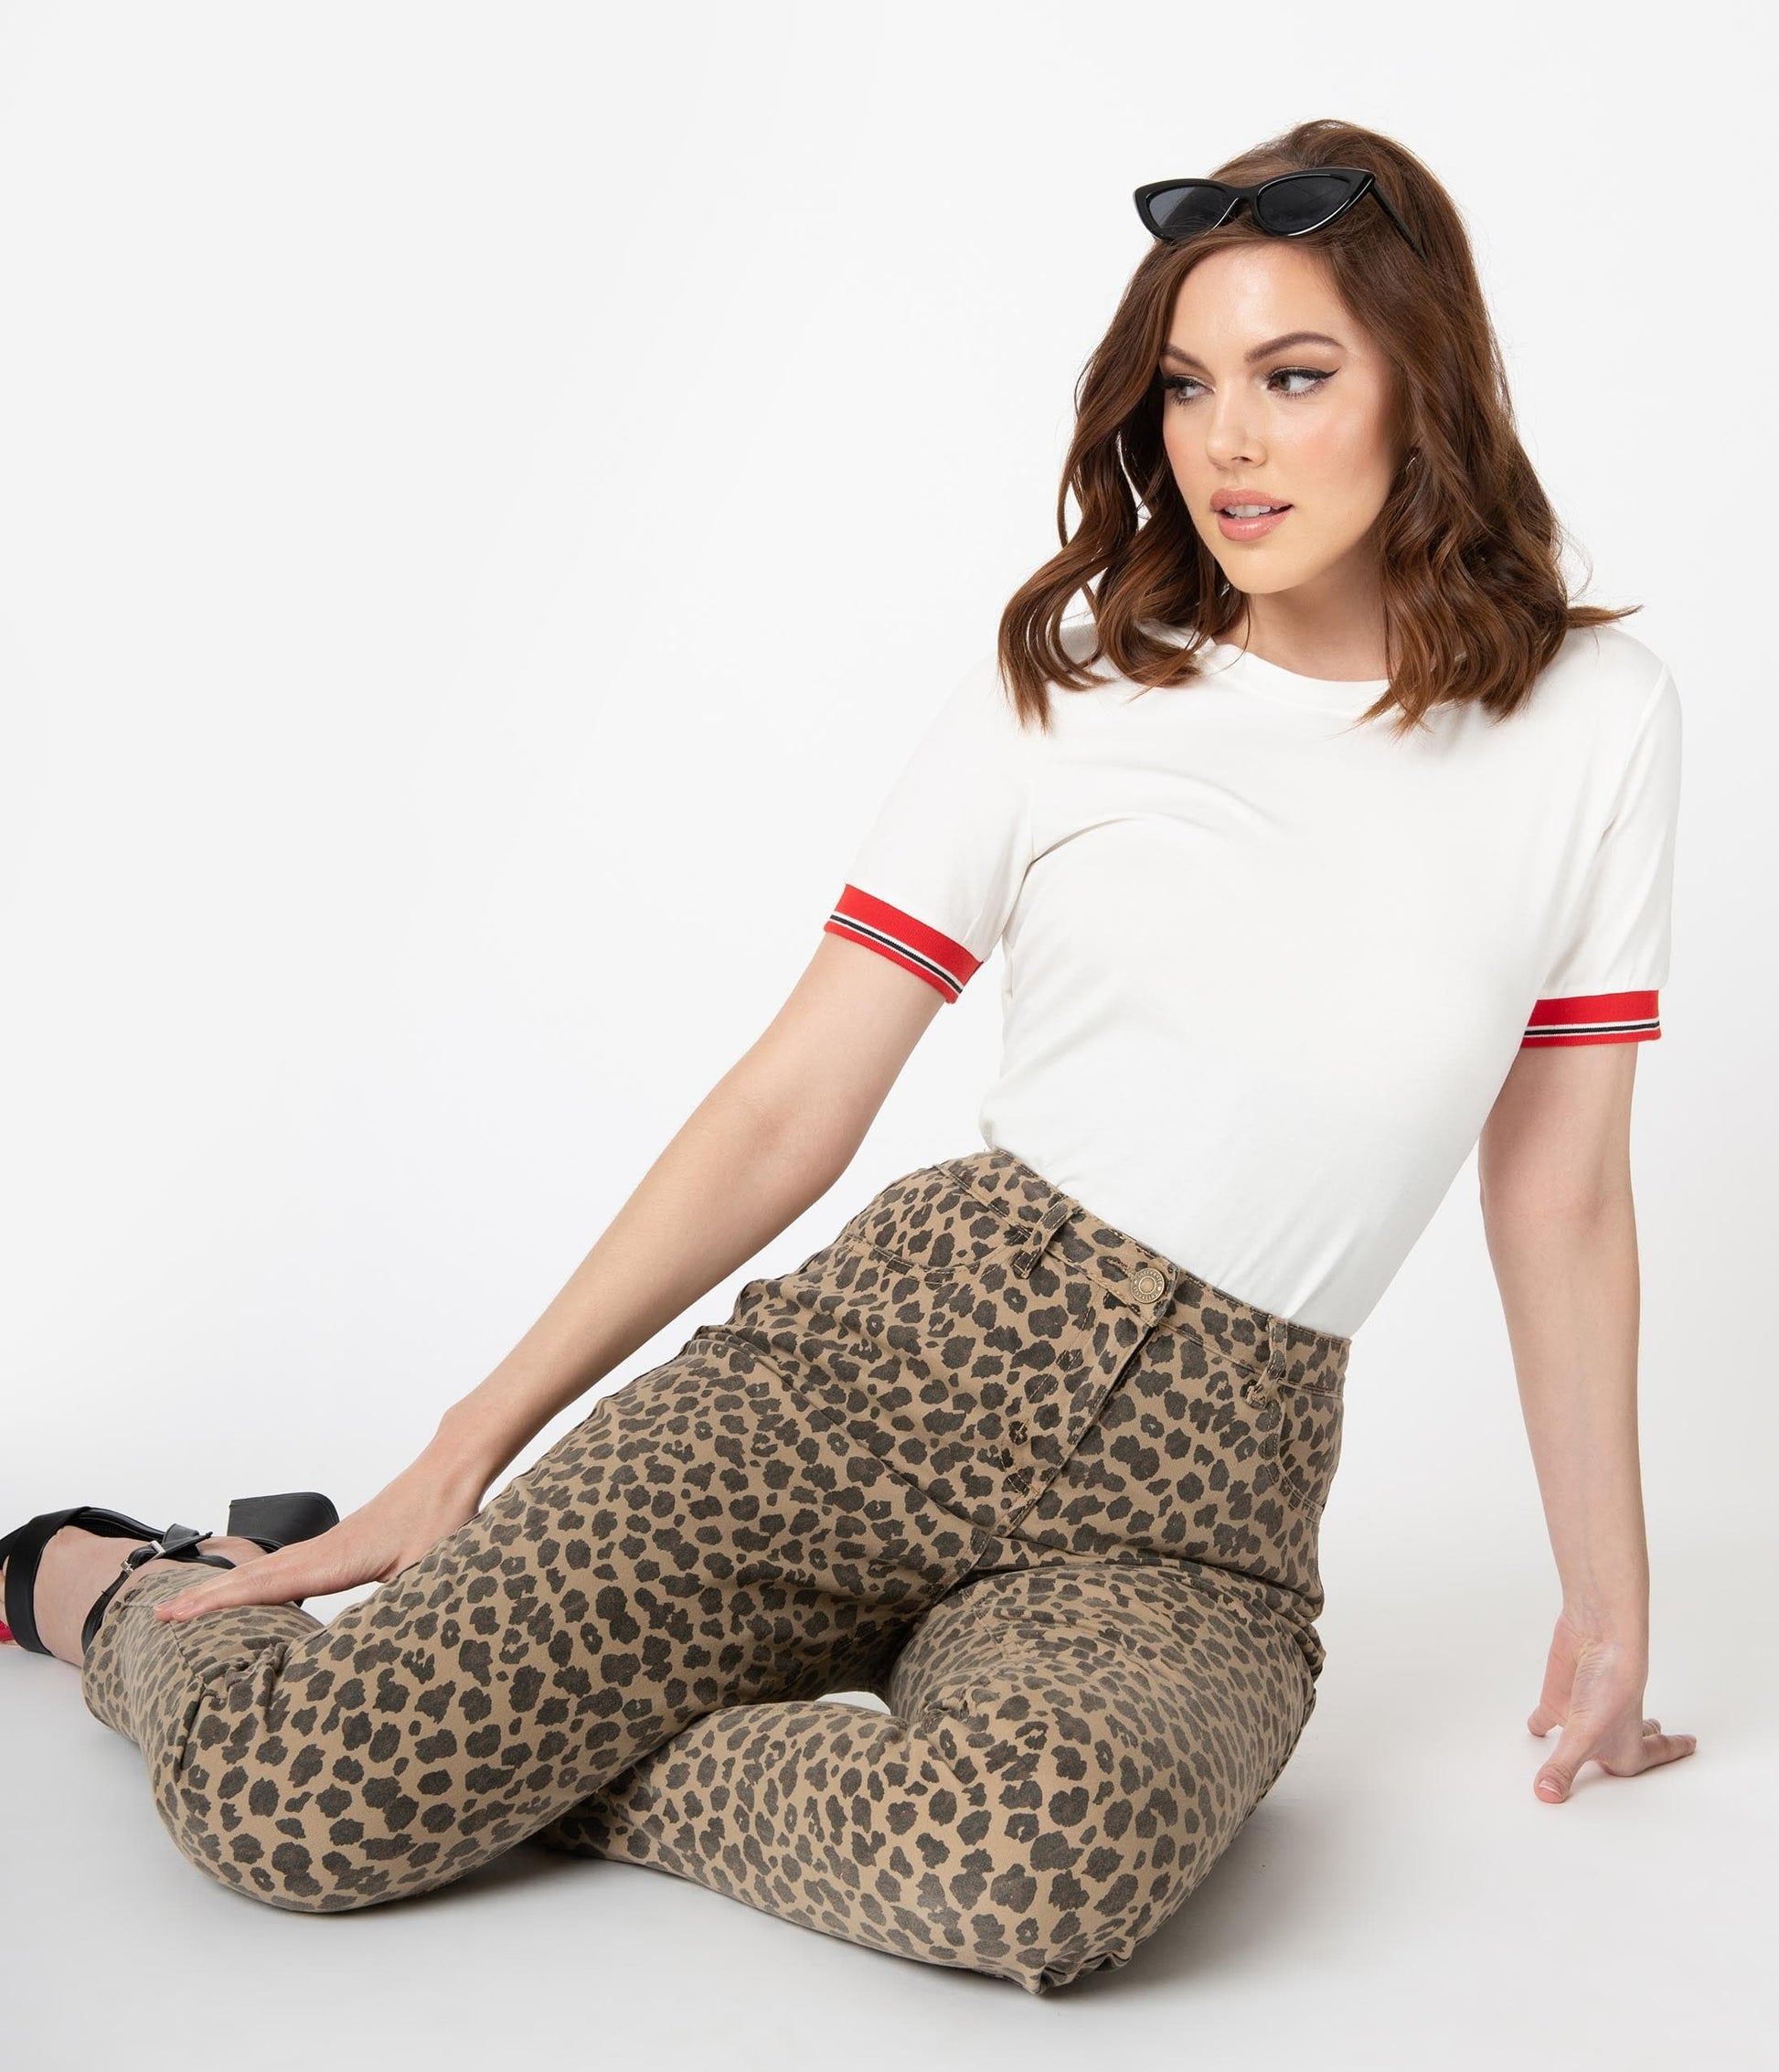 Collectif 1950s Style Denim Leopard Print Maddy Skinny Pants